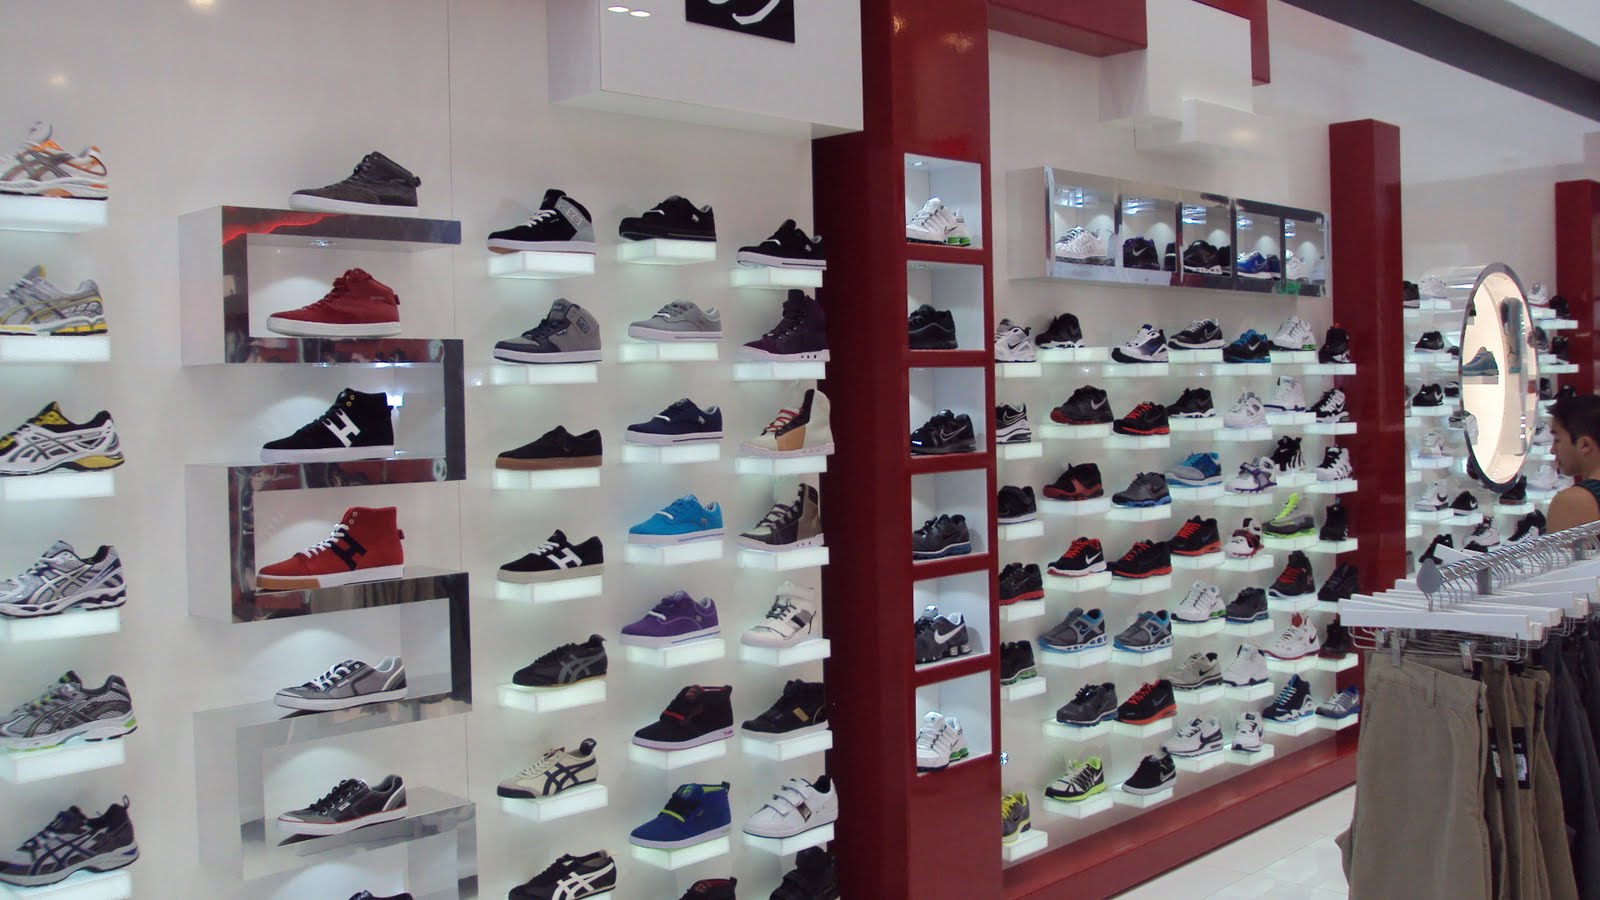 Download image Shoe Palace PC, Android, iPhone and iPad. Wallpapers ...